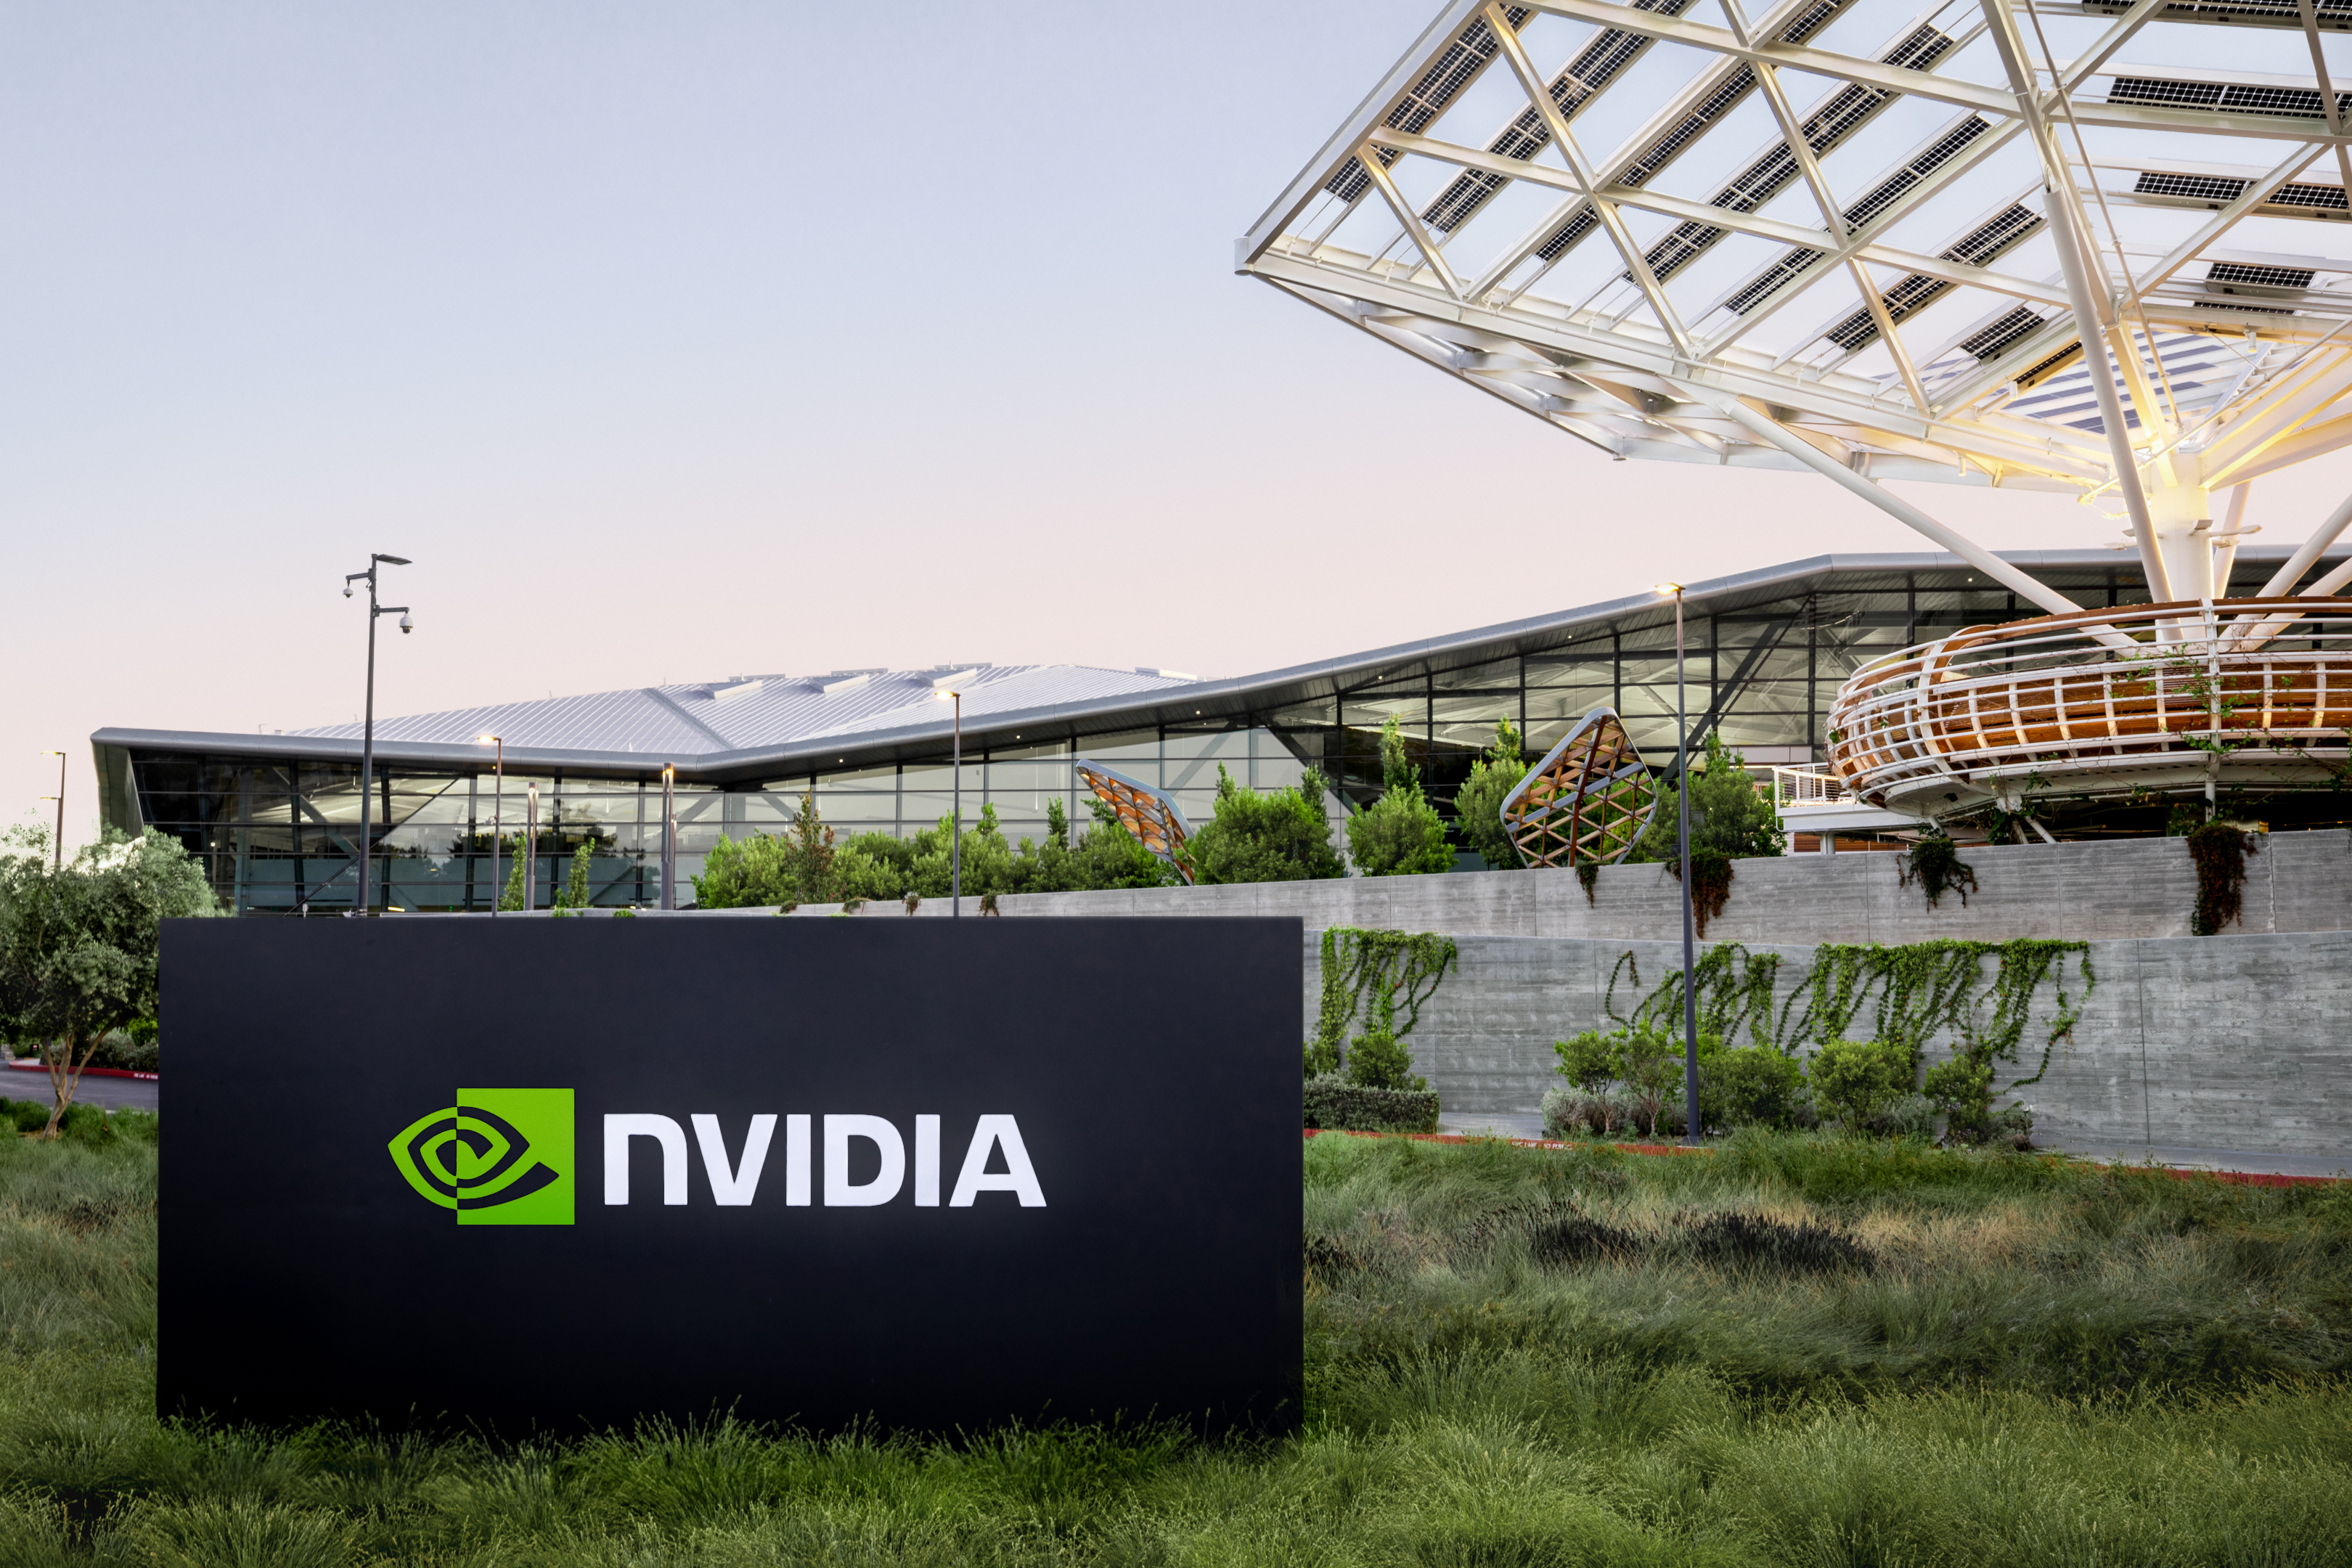 NVIDIA is being sued for copyright infringement in AI training